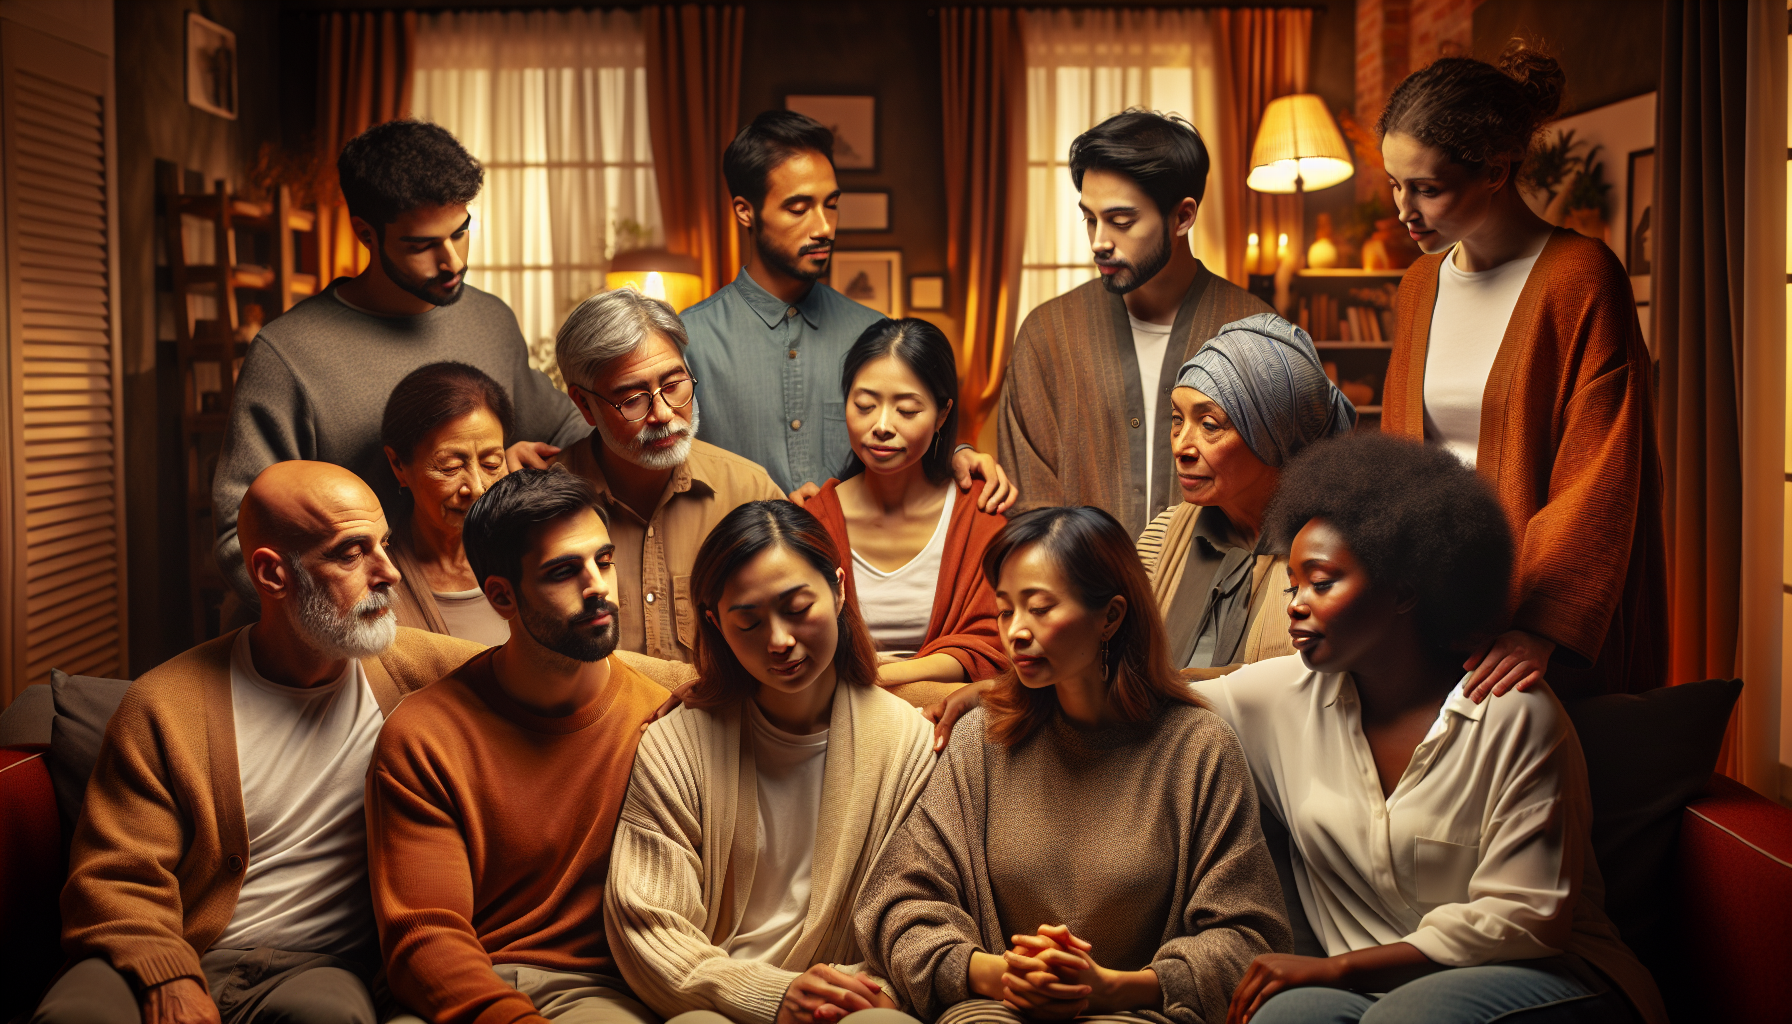 Illustration of a diverse family sitting together, symbolizing family relationships and support